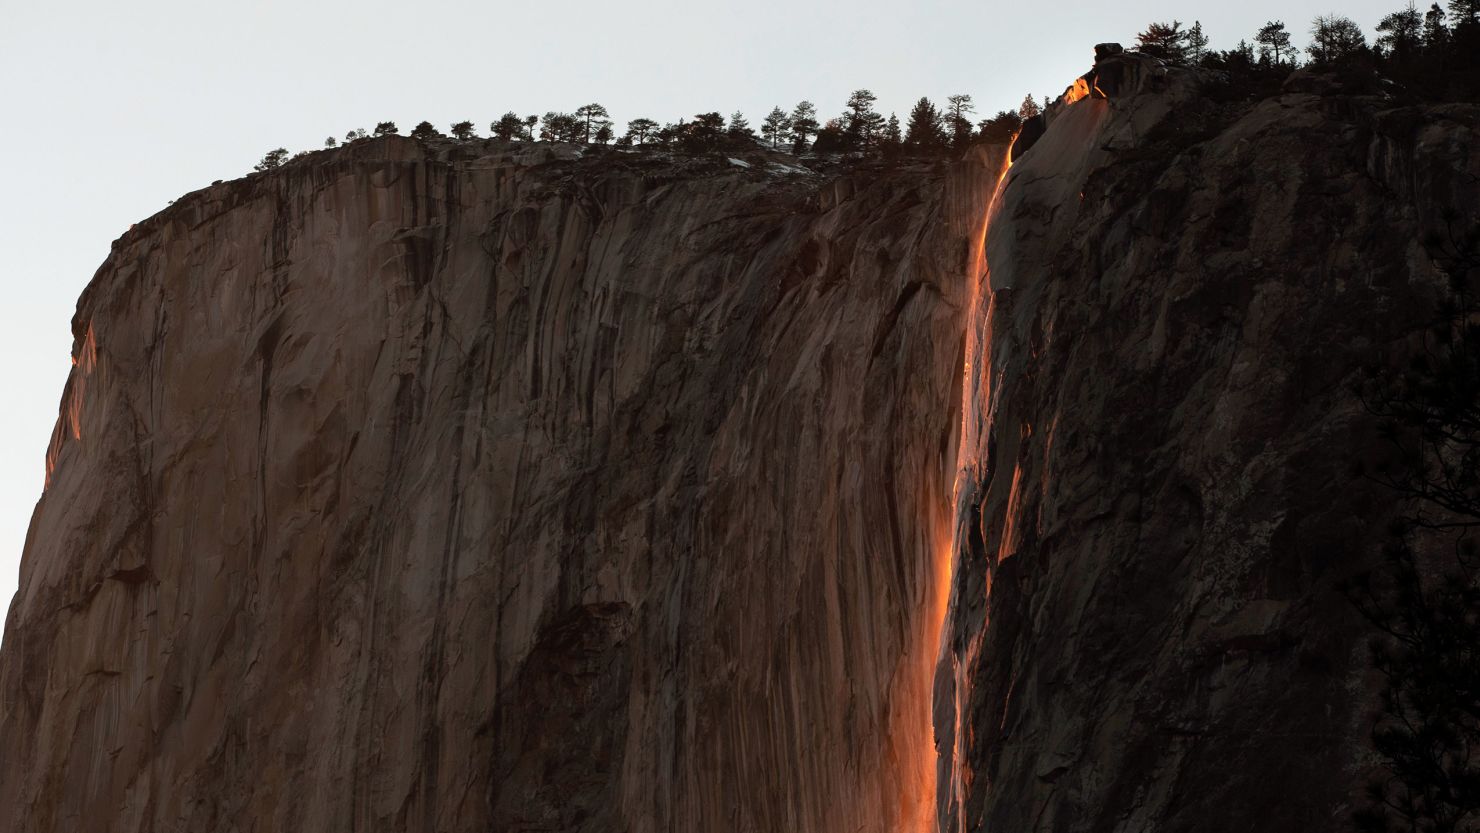 "Firefall" is seen at Yosemite National Park on February 23, 2022.